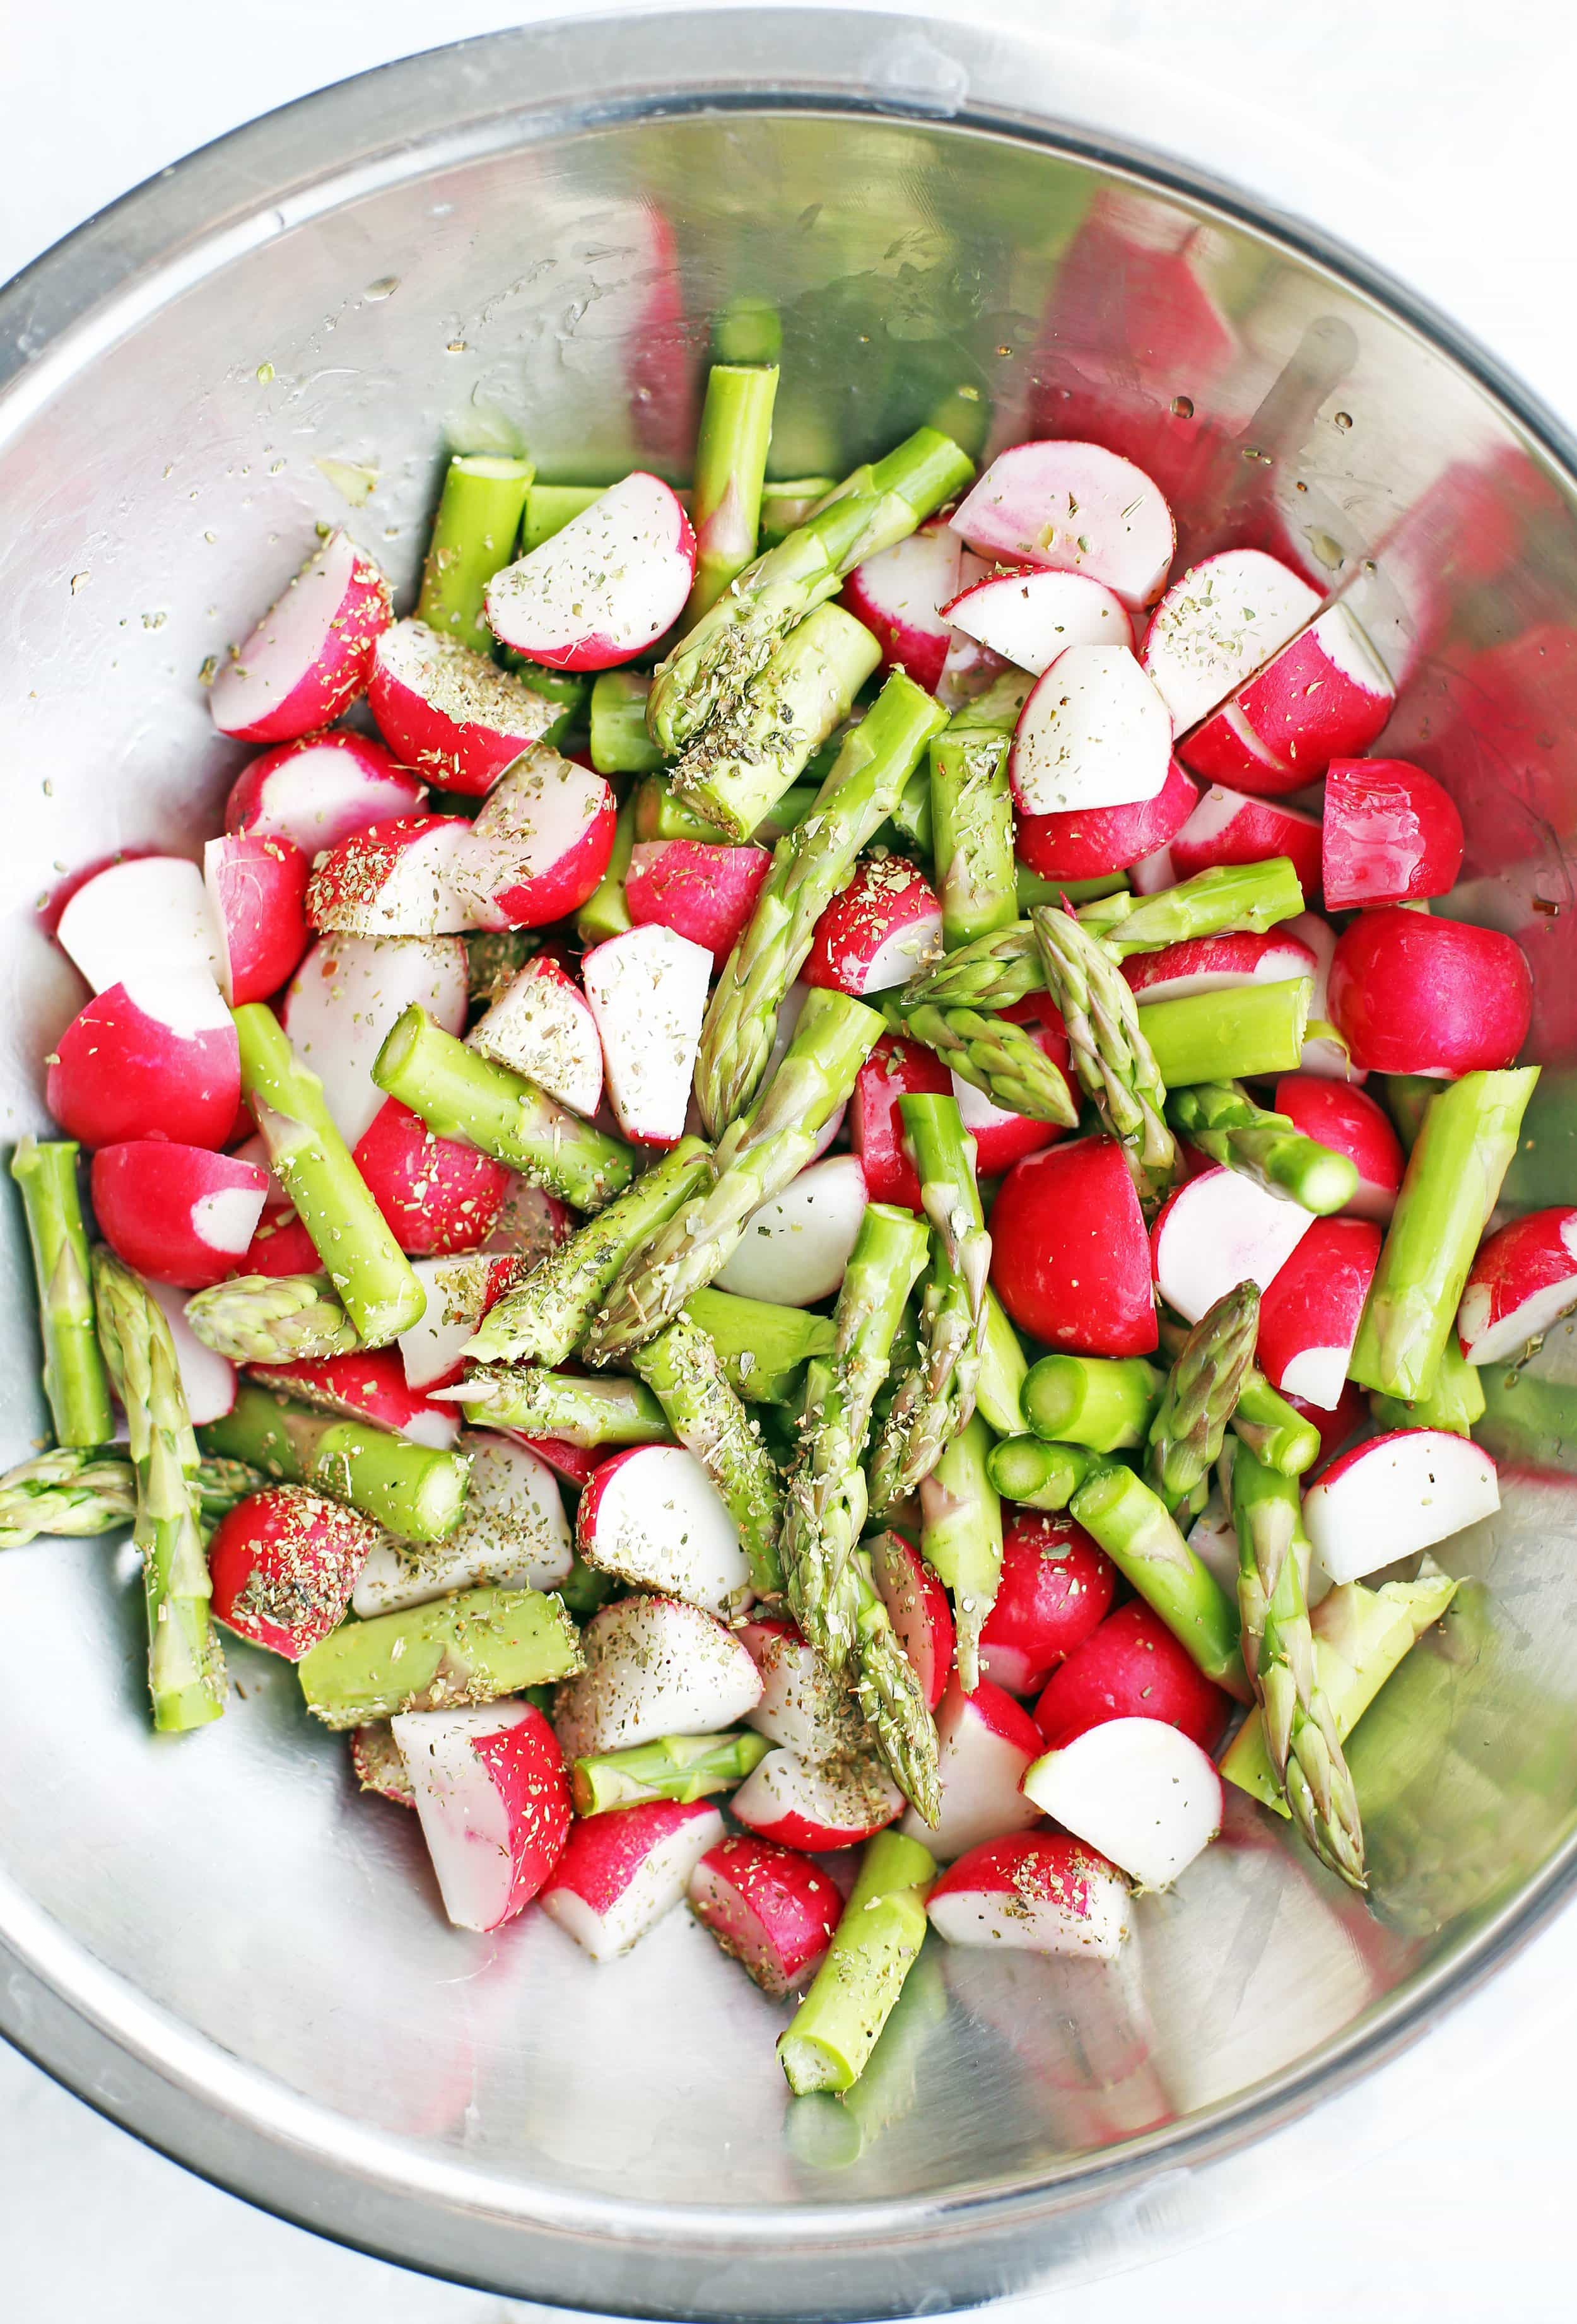 Chopped asparagus and radishes, olive oil, salt, pepper, and dried oregano in a metal bowl.